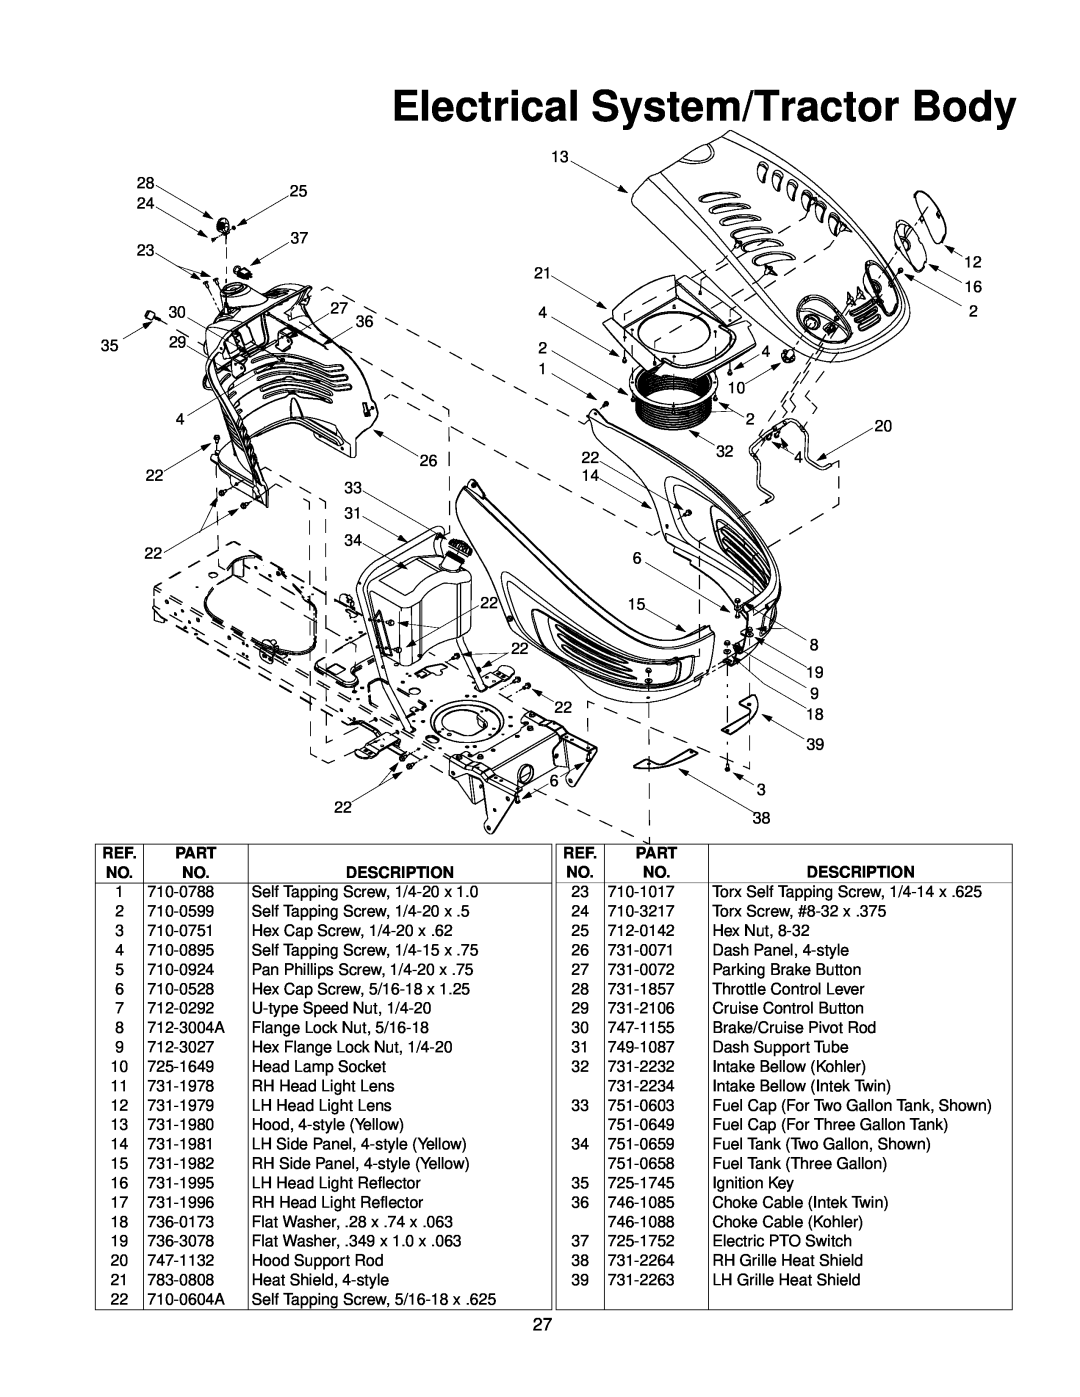 Yard-Man 247.27432 manual Fuel Cap For Two Gallon Tank, Shown, Ignition Key, Electrical System/Tractor Body 